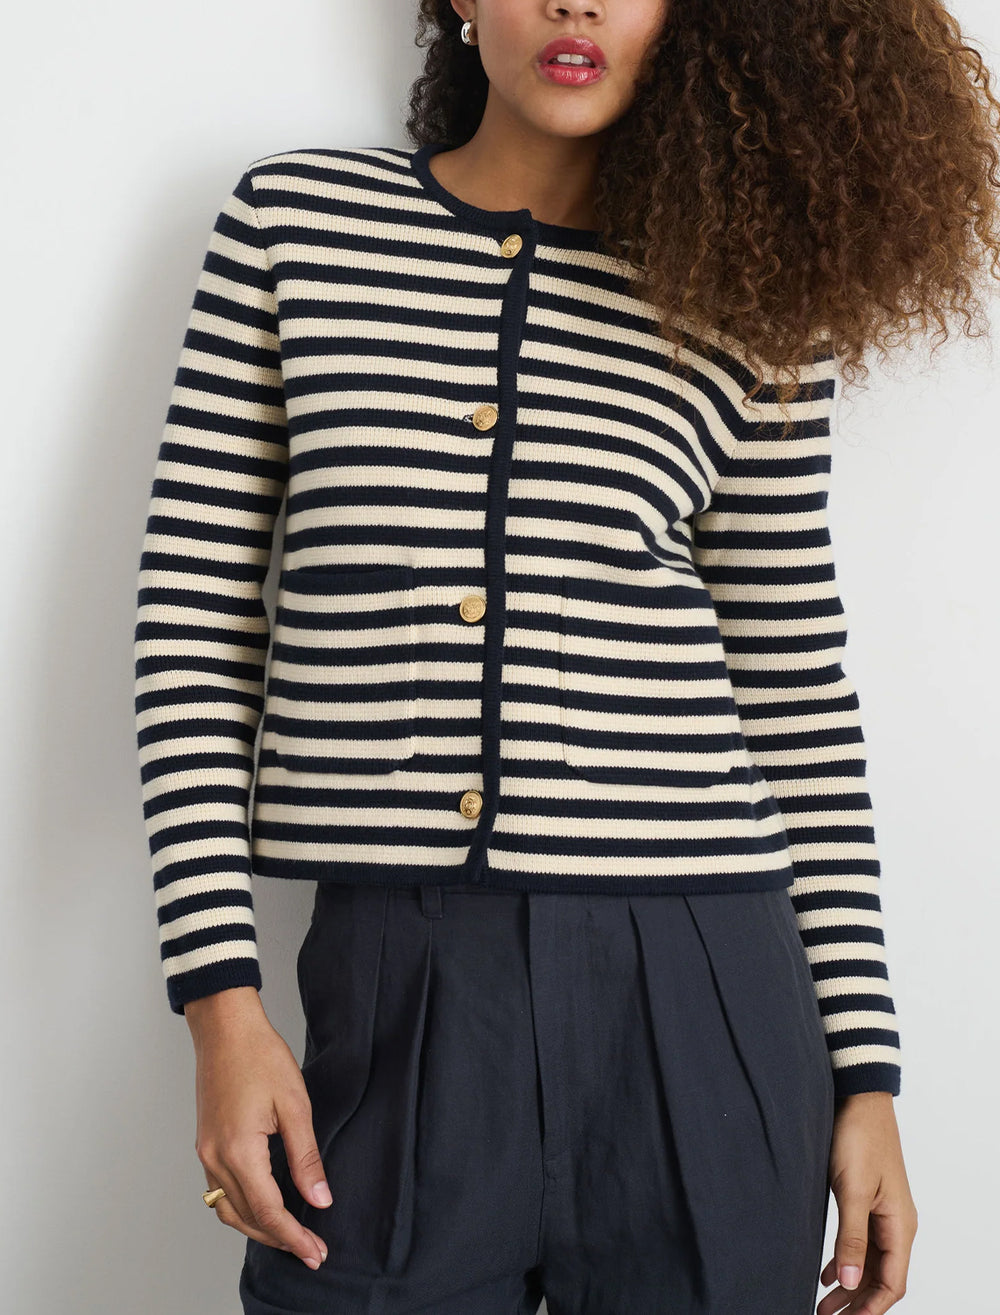 Model wearing Alex Mill's paris sweater in navy and ivory stripe.